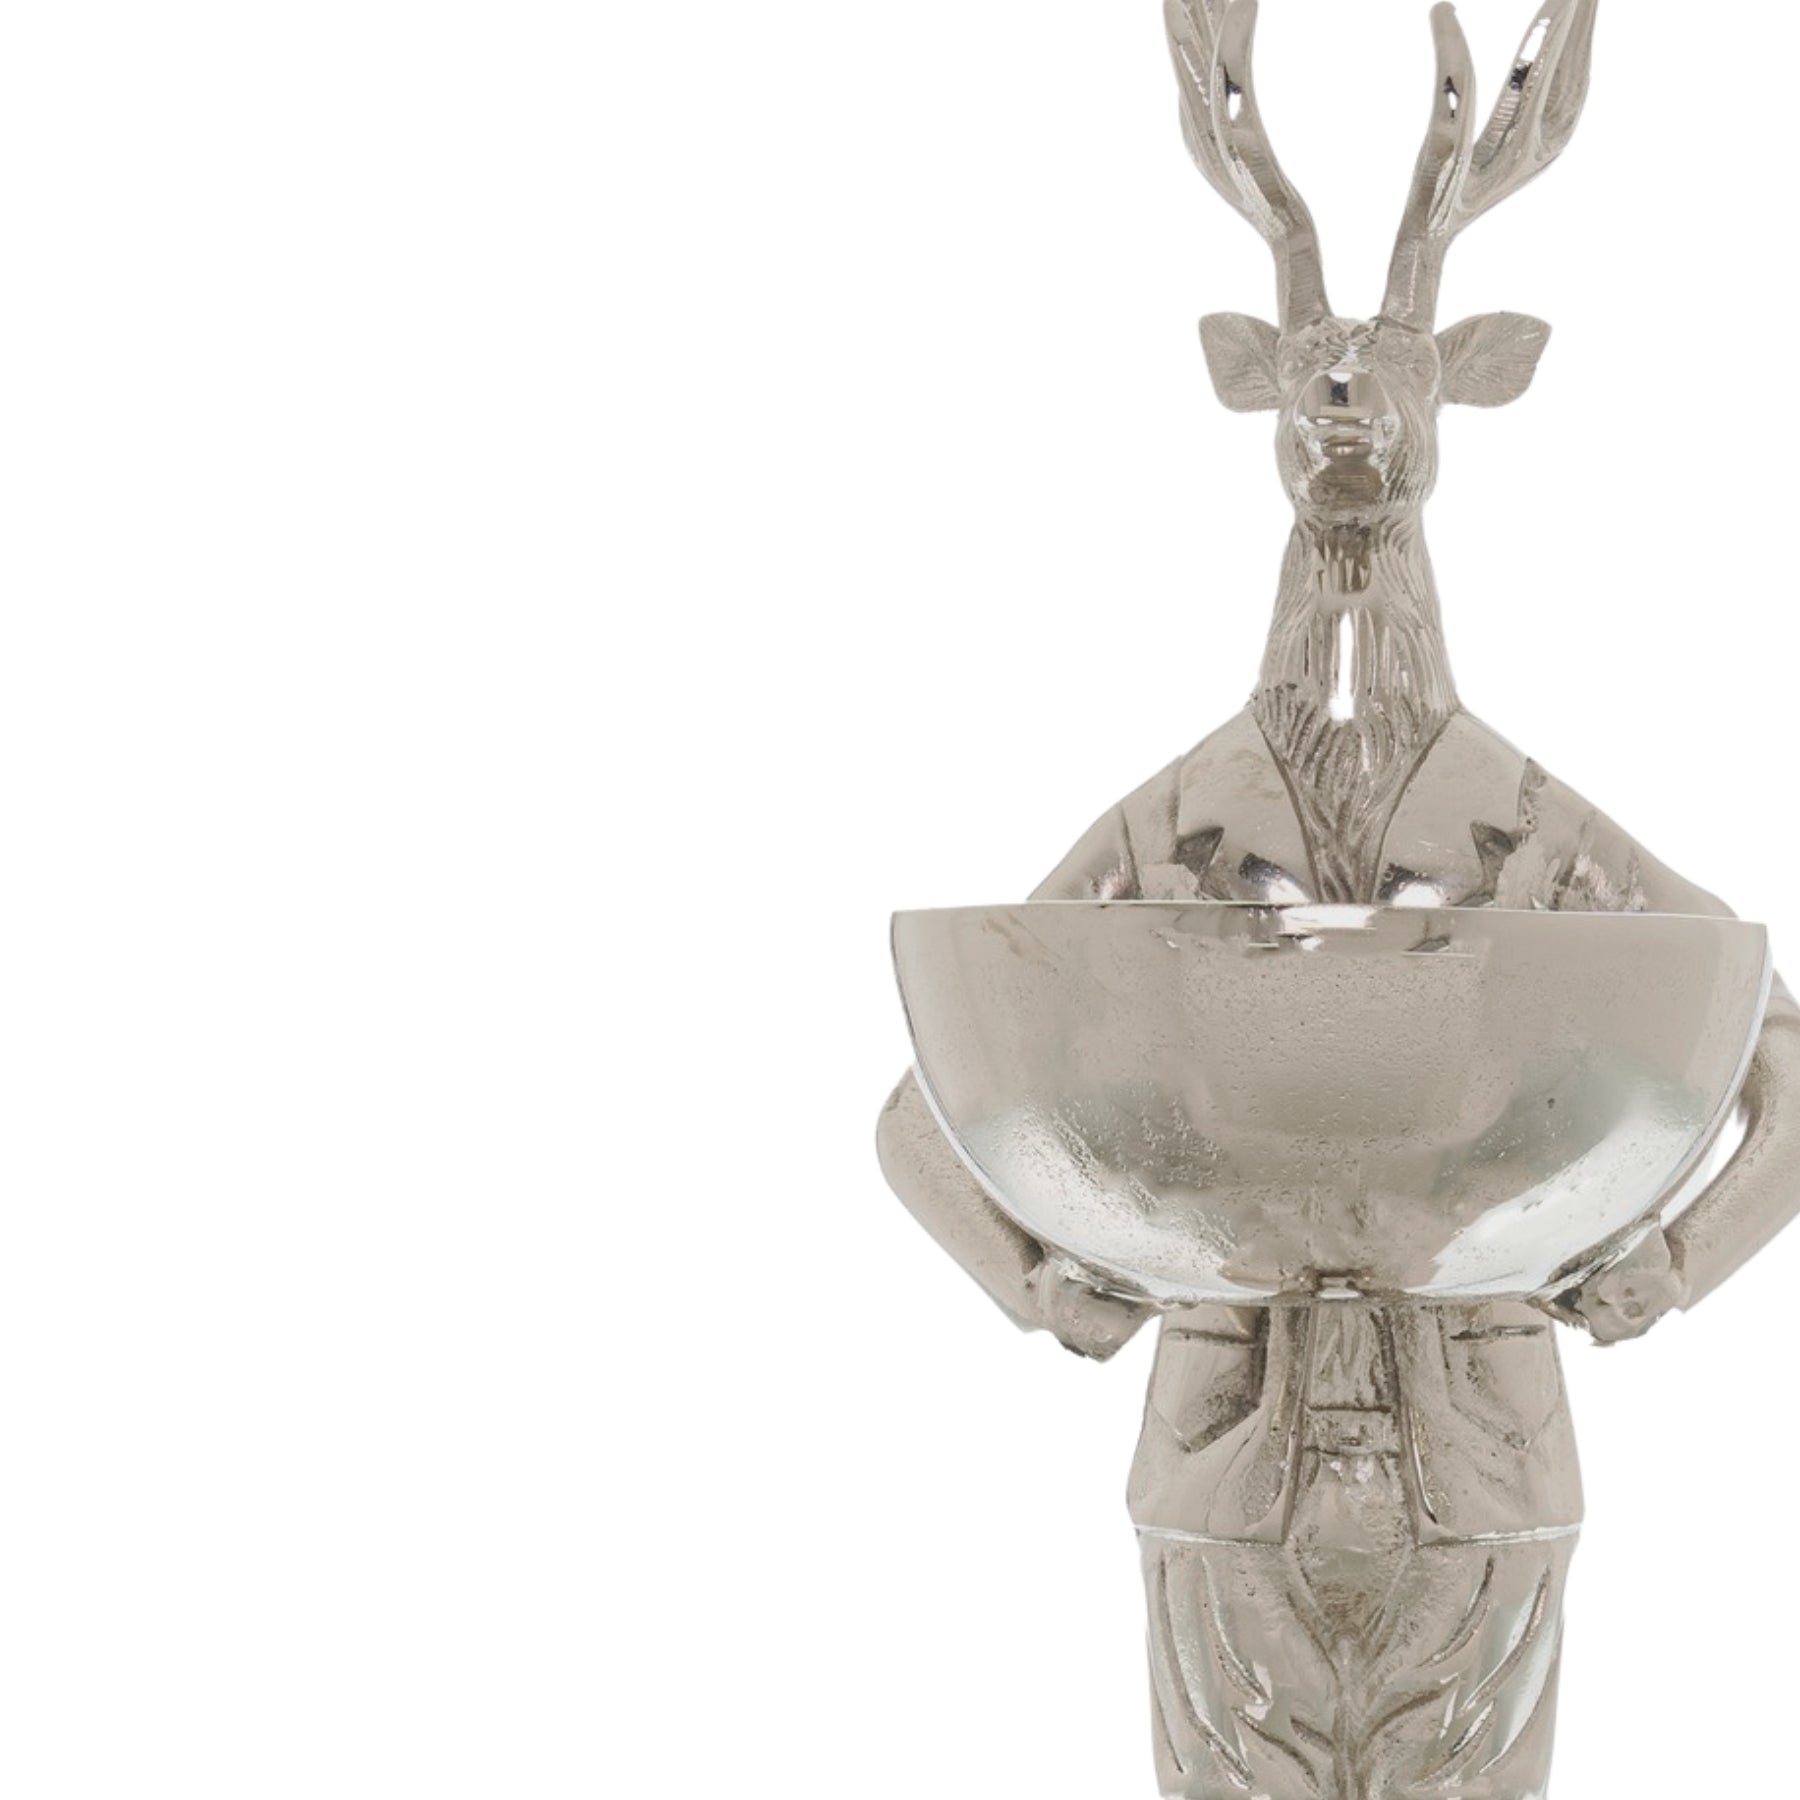 Standing Silver Stag Ornament  With Bowl